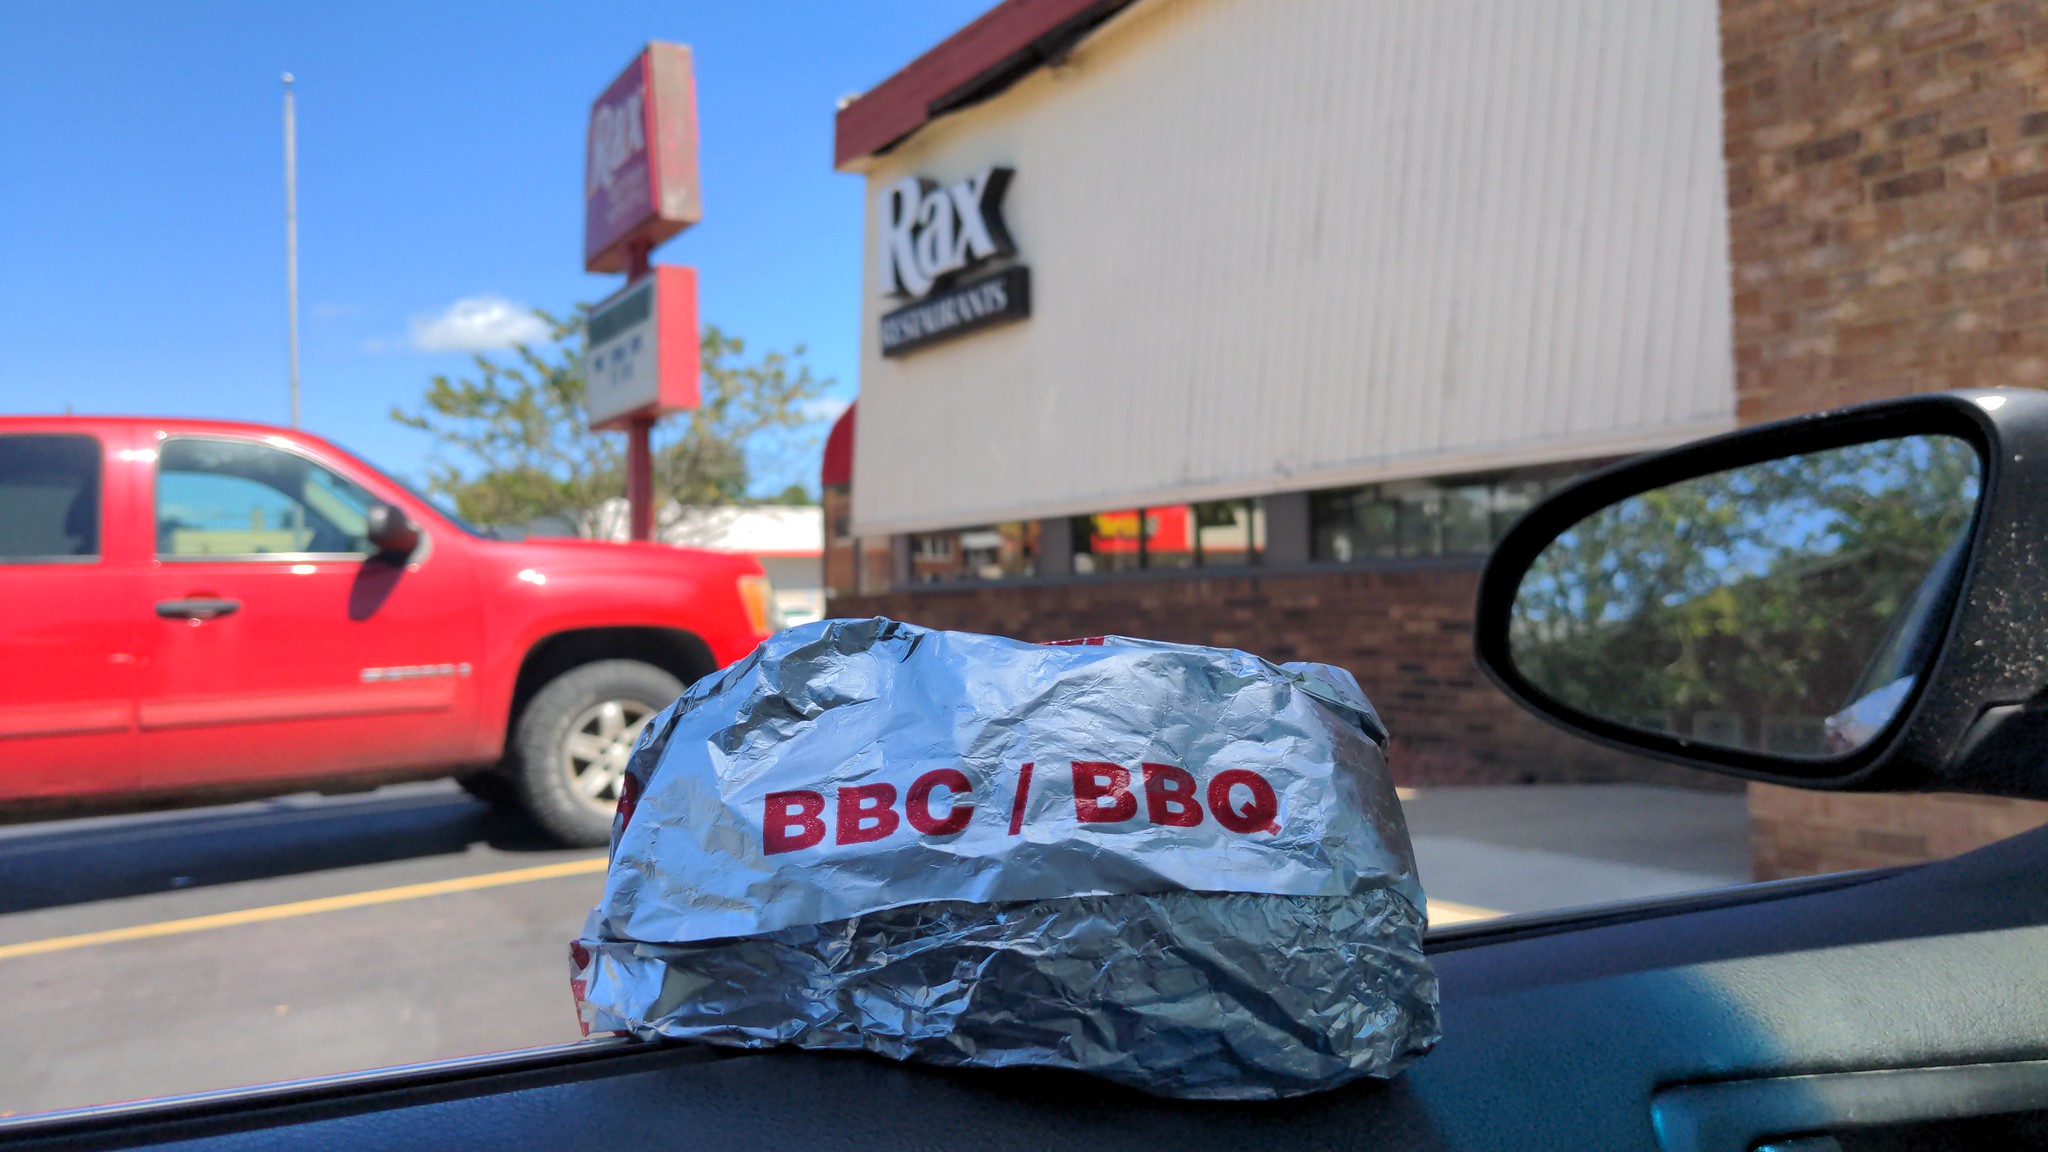 A sandwich wrapped up in silver foil with the red letters BBC and BBQ on the outside. The sandwich sits on the ledge of a rolled down car window. Outside the window is a fast food restaurant named Rax.